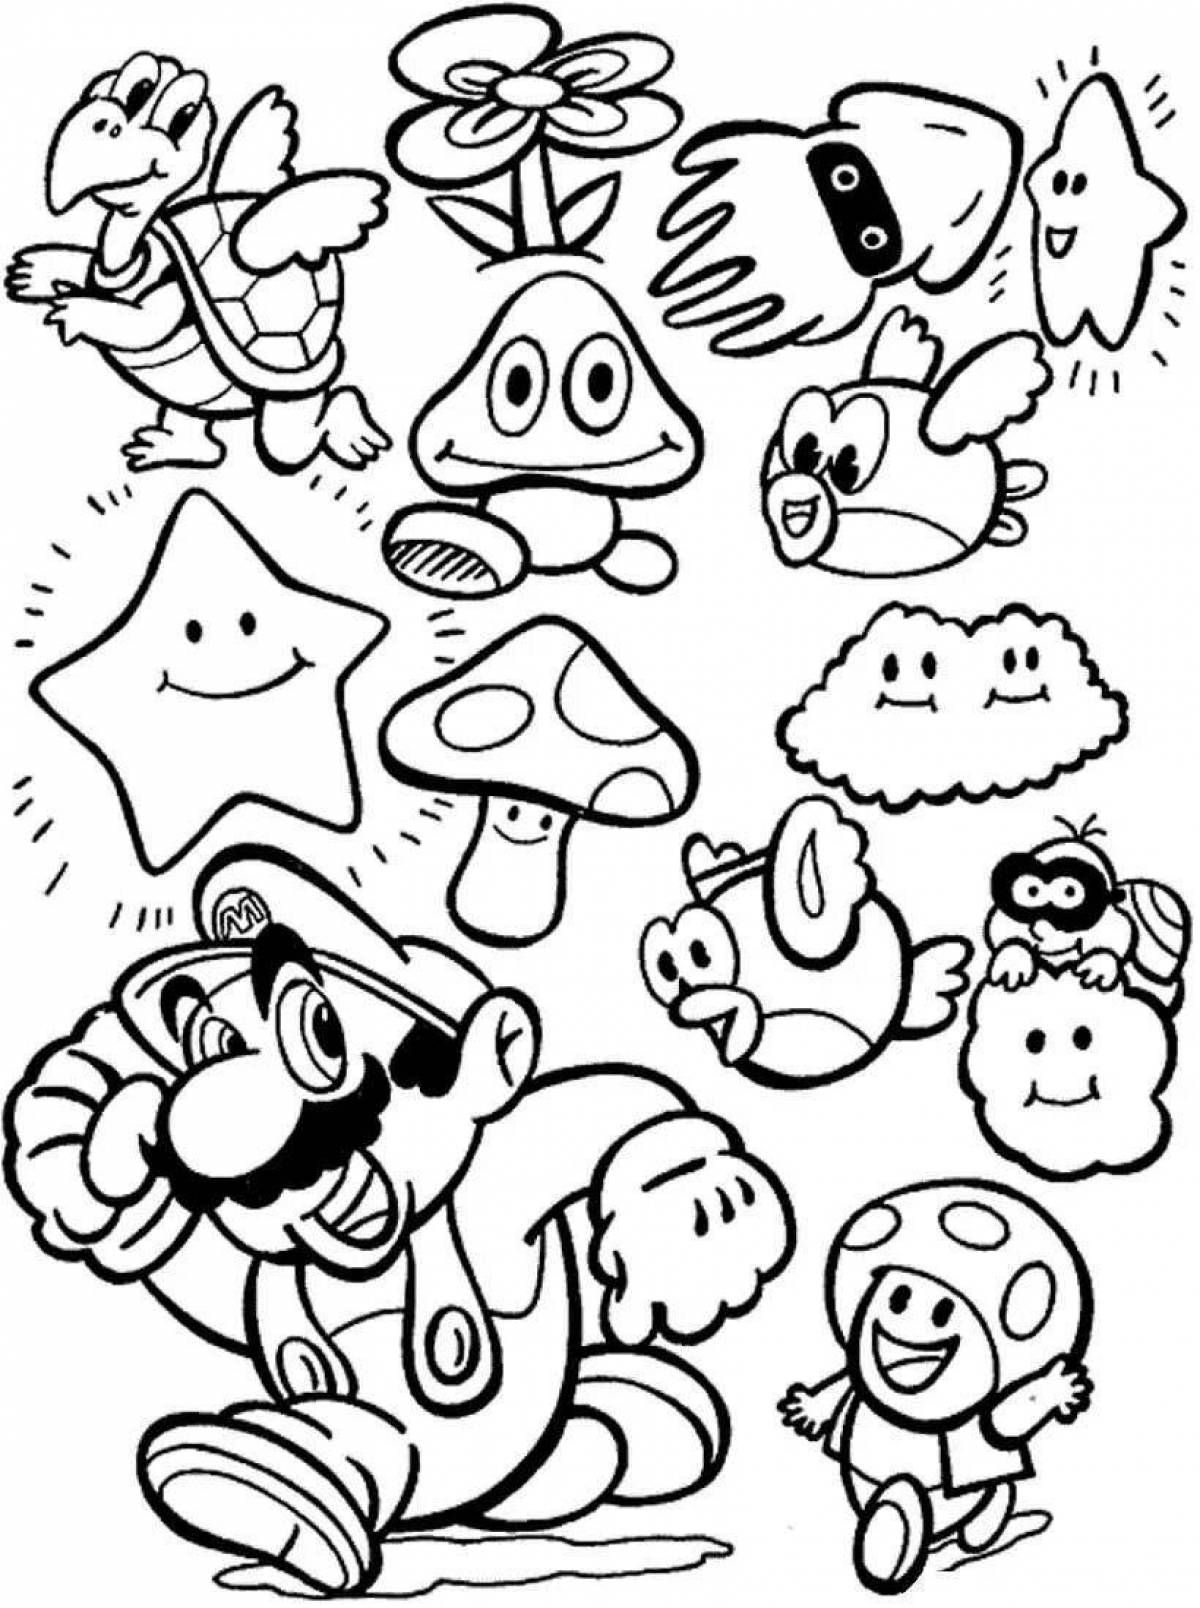 Mario coloring book for kids